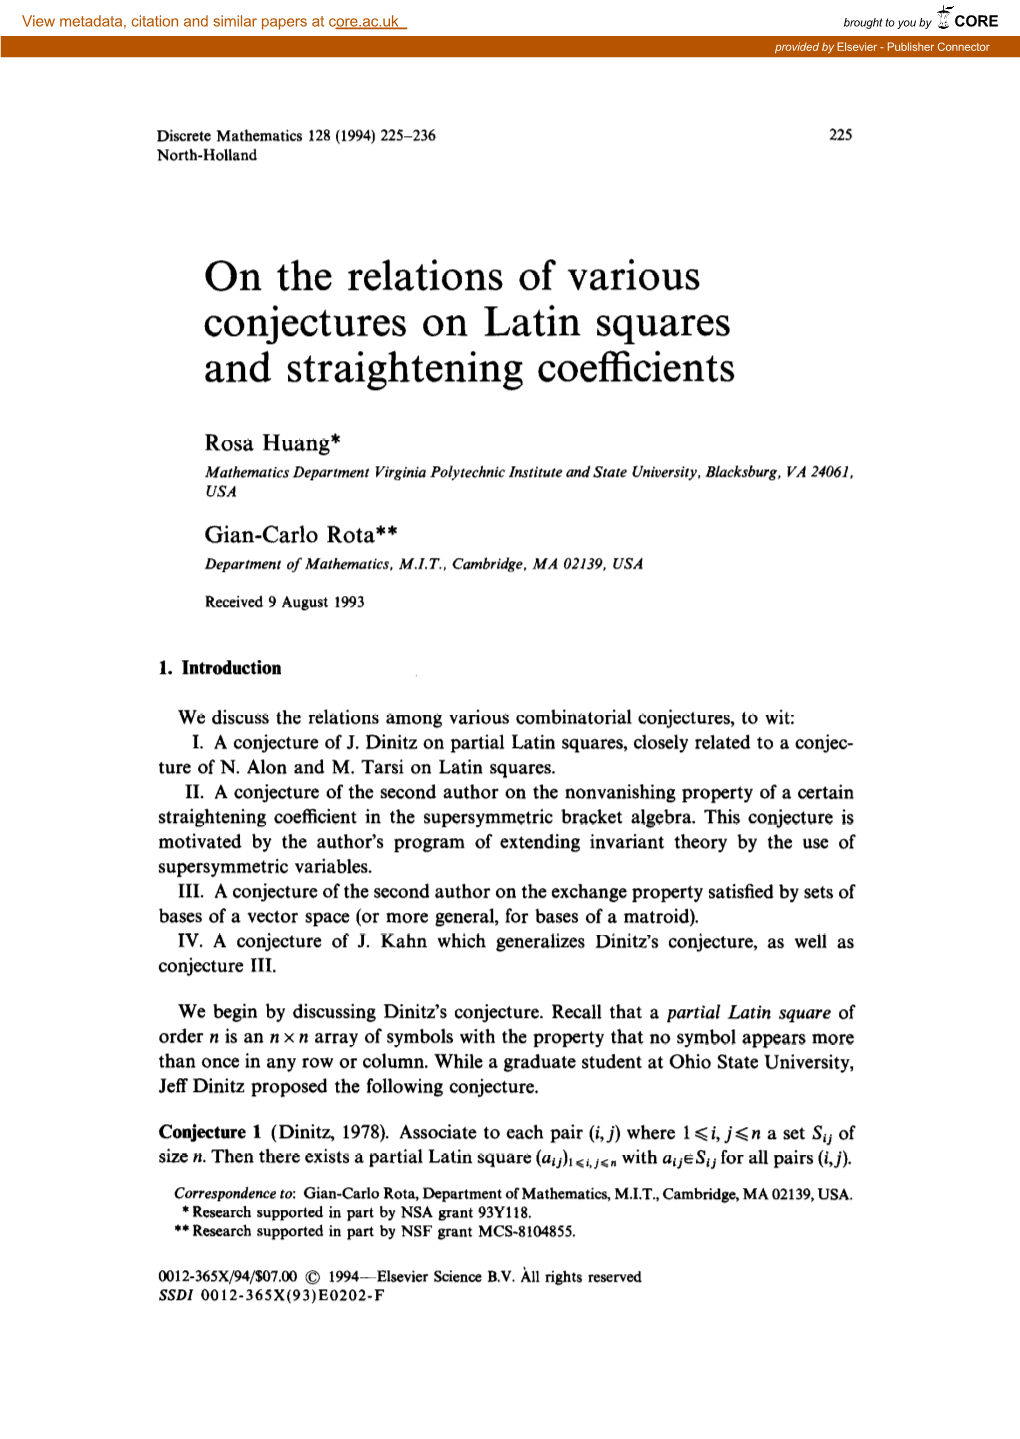 On the Relations of Various Conjectures on Latin Squares and Straightening Coefficients